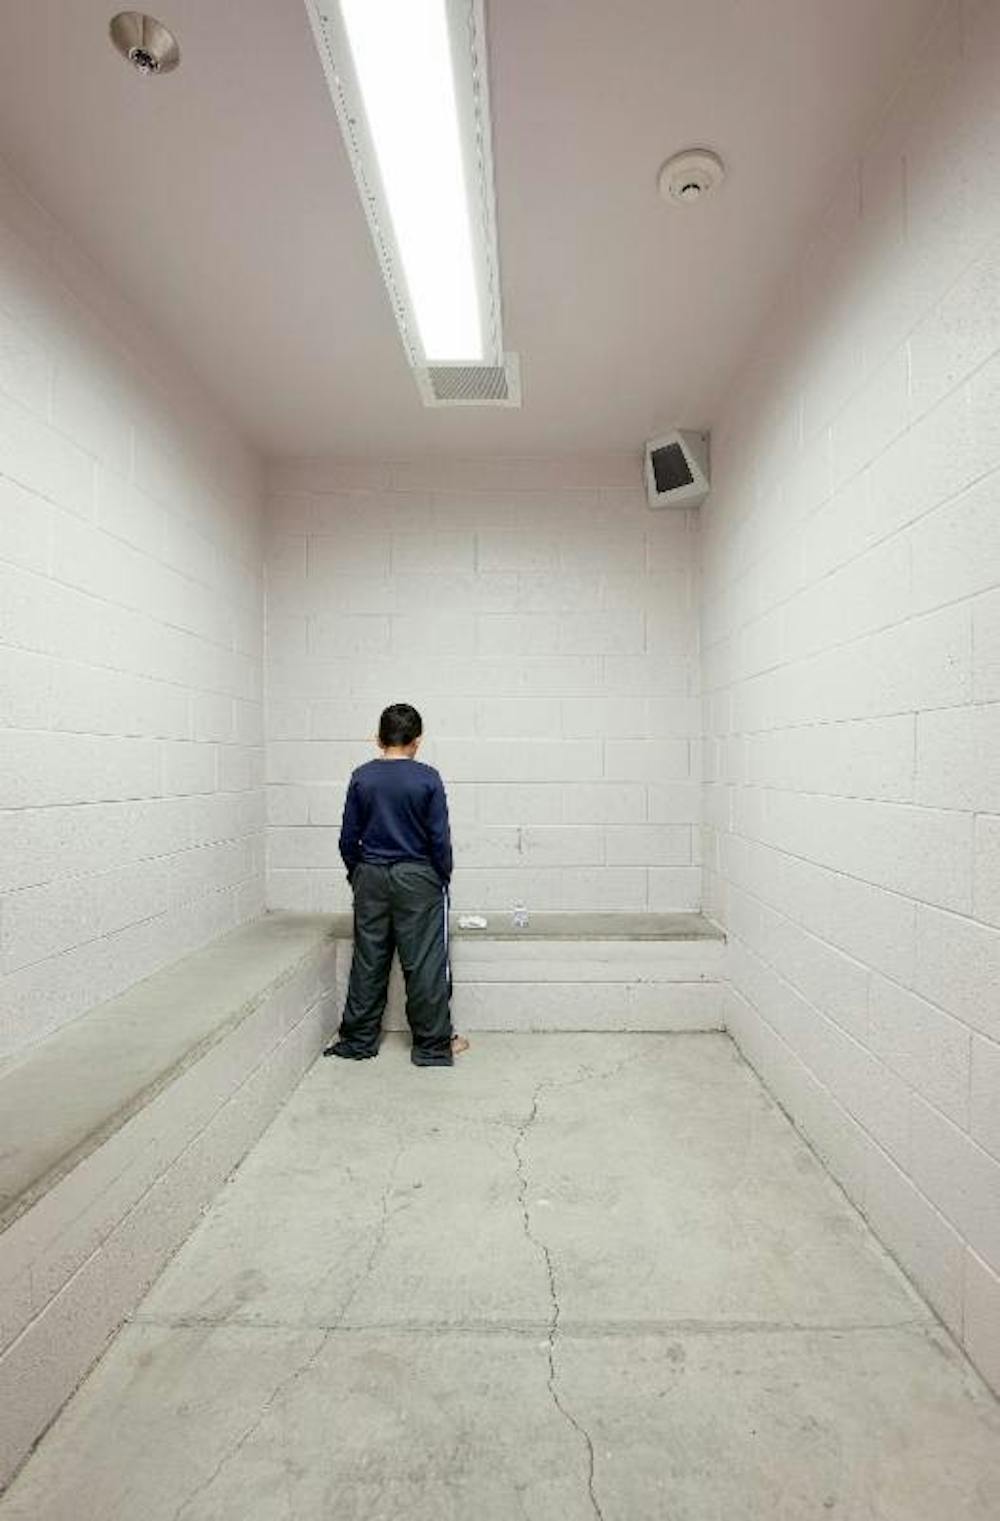 Richard Ross (American, b. 1947). "I'm waiting for my mom to come get me. Is she in there? She's at work today. I want to go home. I got in trouble at school today." -R.T., age 10. Washoe County Detention Facility, Reno, Nevada, from Juvenile in Justice, 2012.&nbsp;